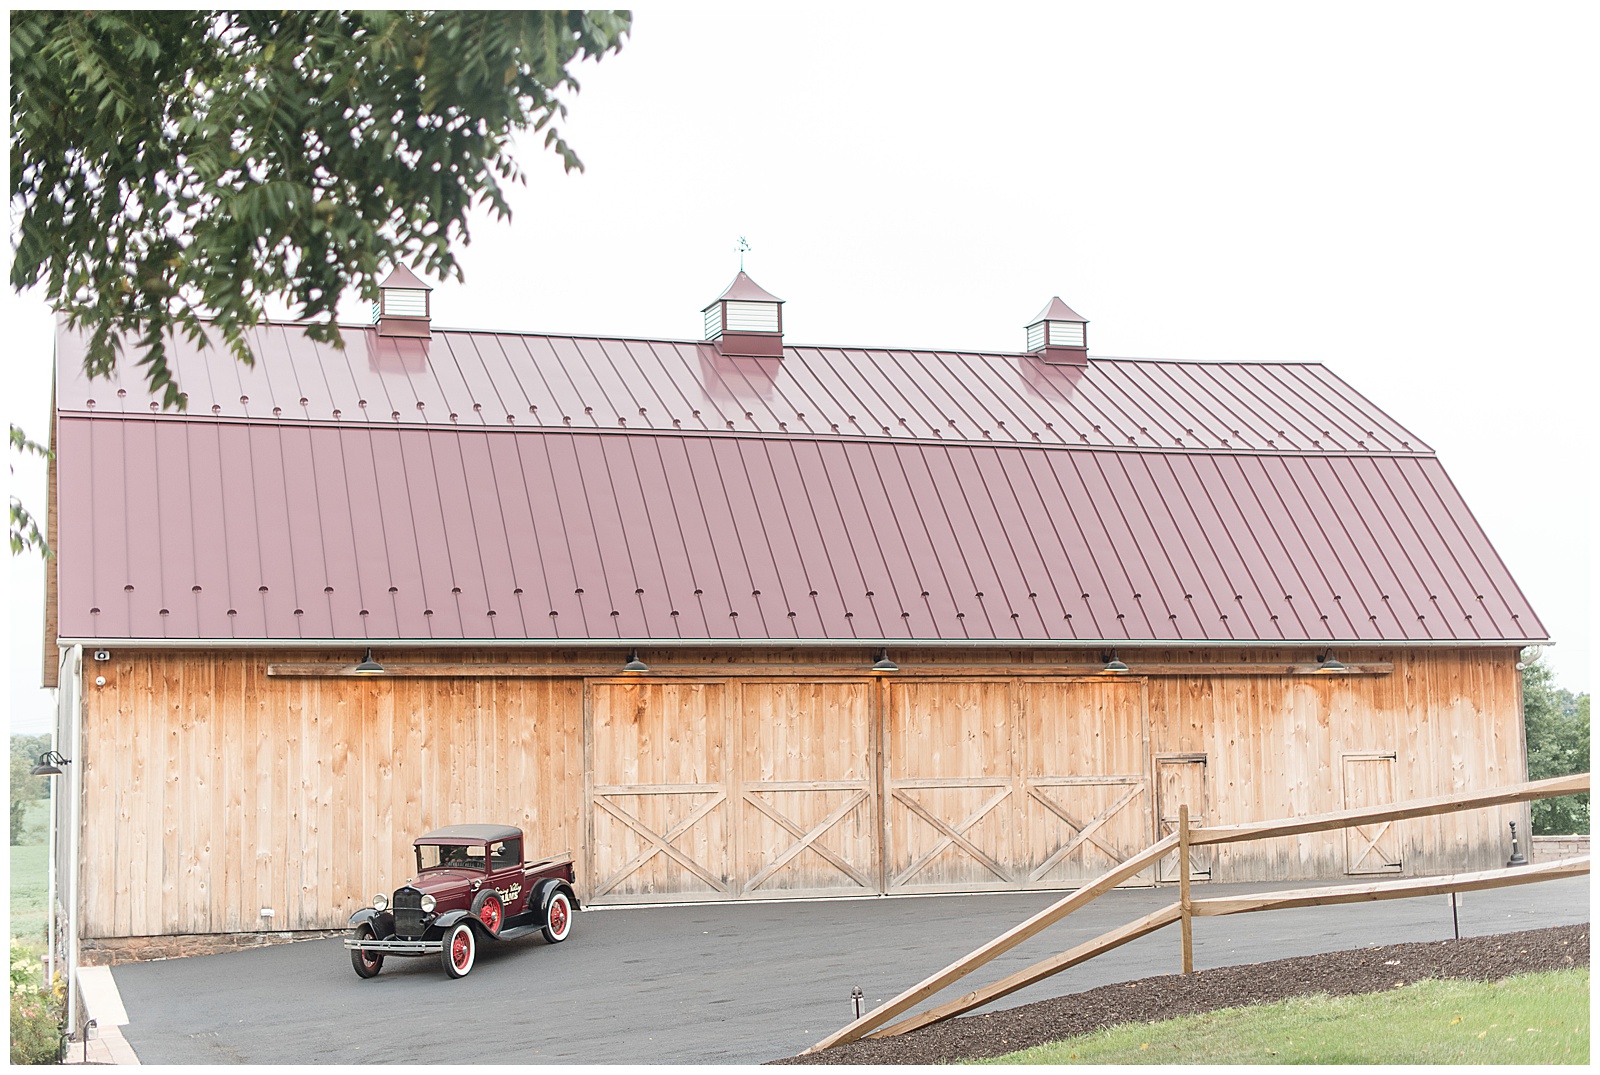 photo of maroon Model A Ford parked on driveway in front of wooden barn with maroon metal roof and car is on the left side of photo and wooden split-rail fence is on right side of photo at Spring Valley Farms in Dover, PA